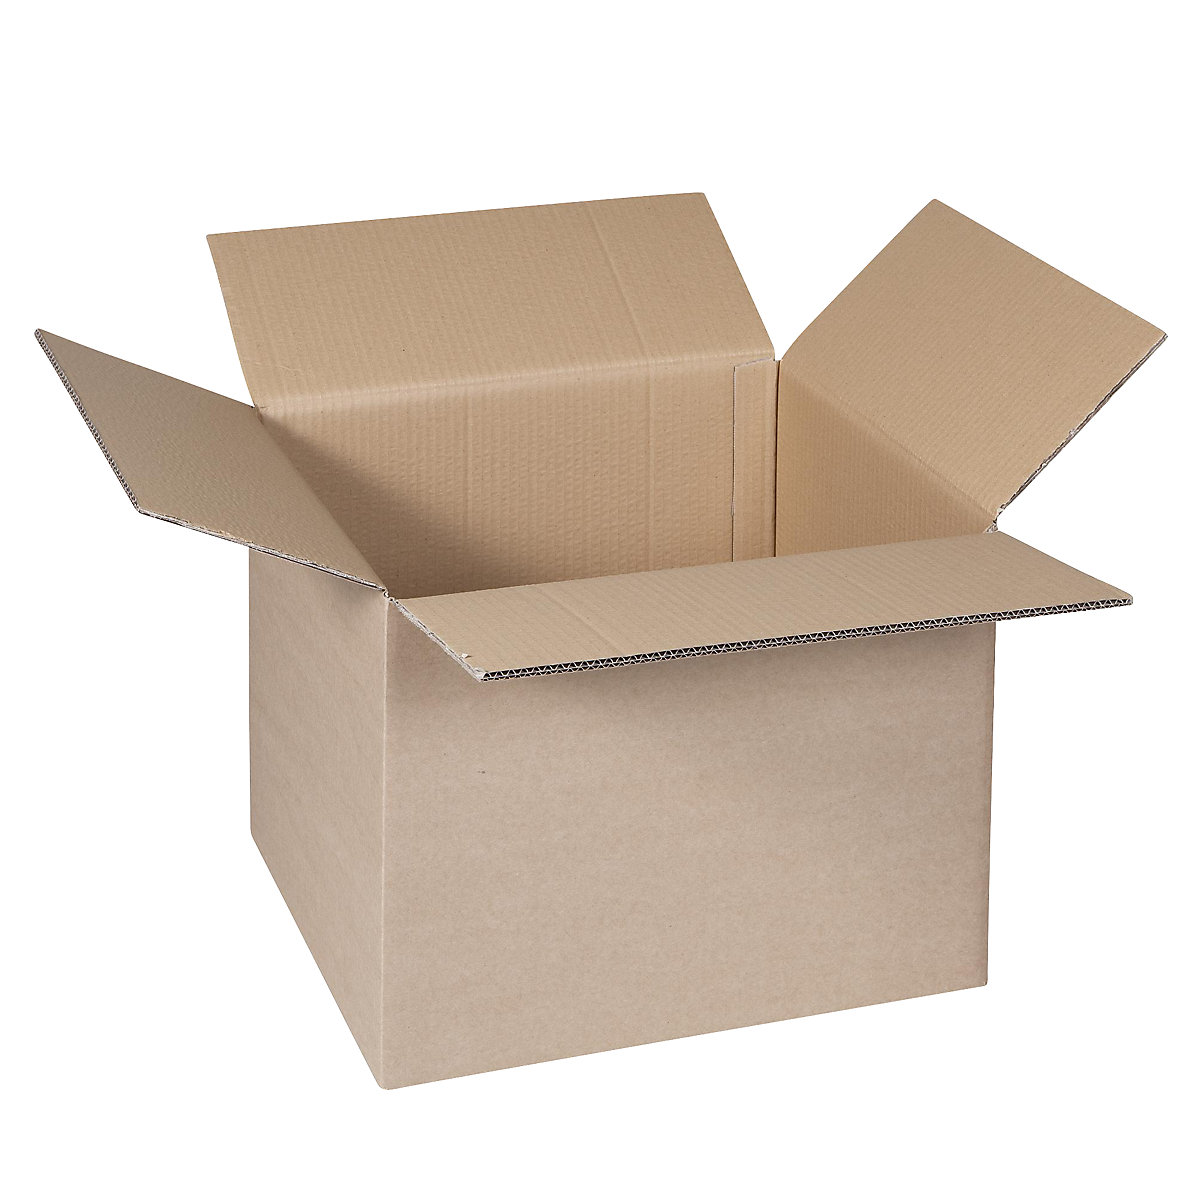 Folding cardboard box, FEFCO 0201, made of double fluted cardboard, internal dimensions 430 x 350 x 315 mm, pack of 50-28